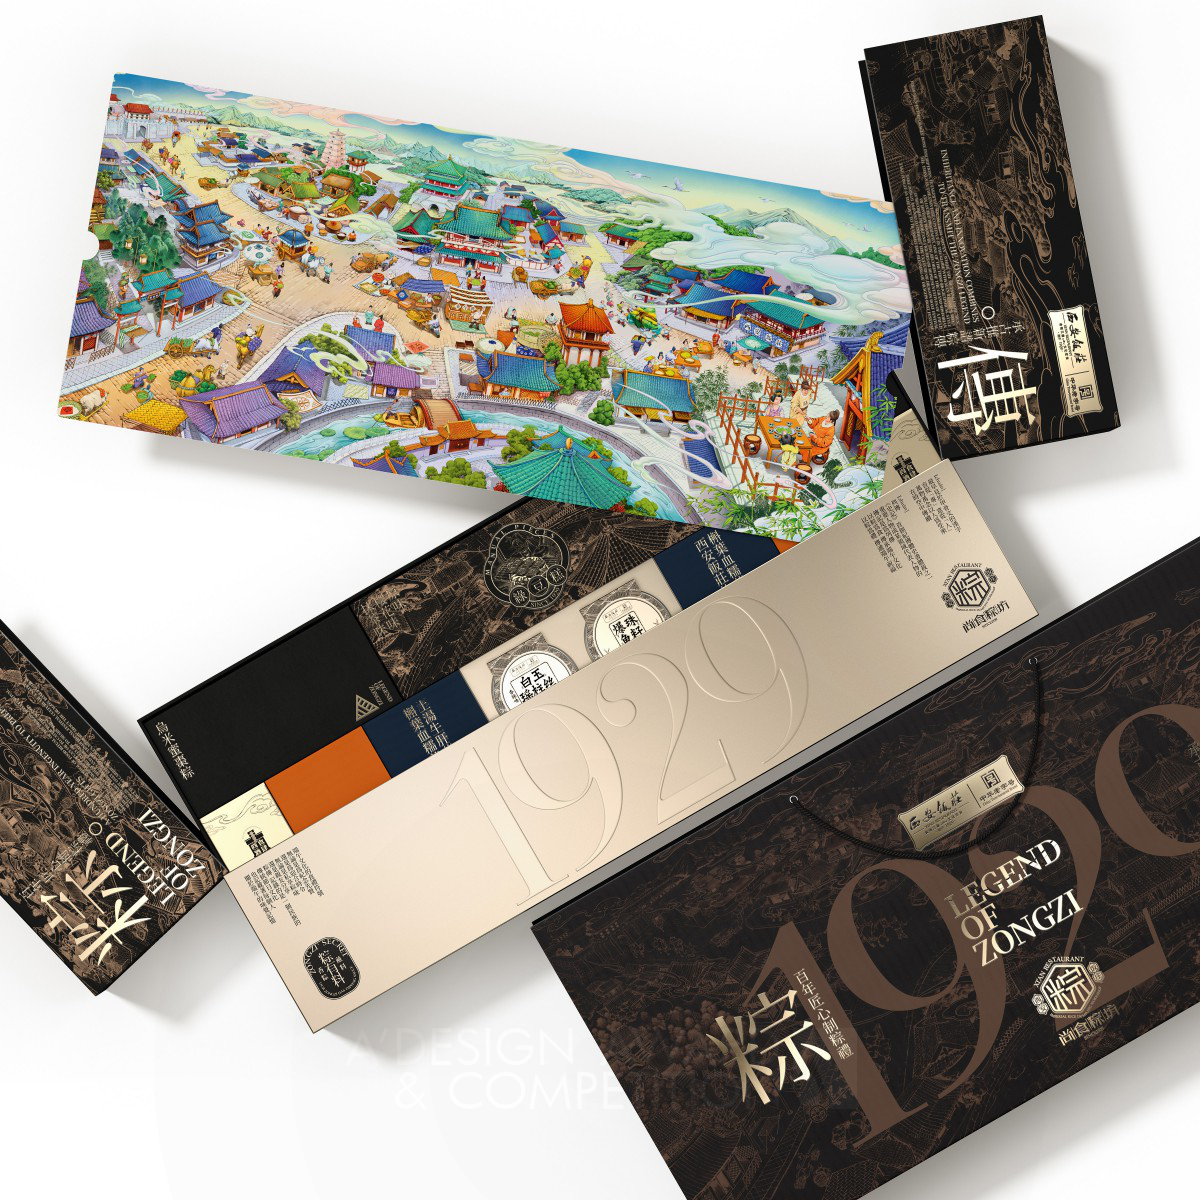 Wei Jiang wins Silver at the prestigious A' Packaging Design Award with Zongchuan 1929 Food Packaging.